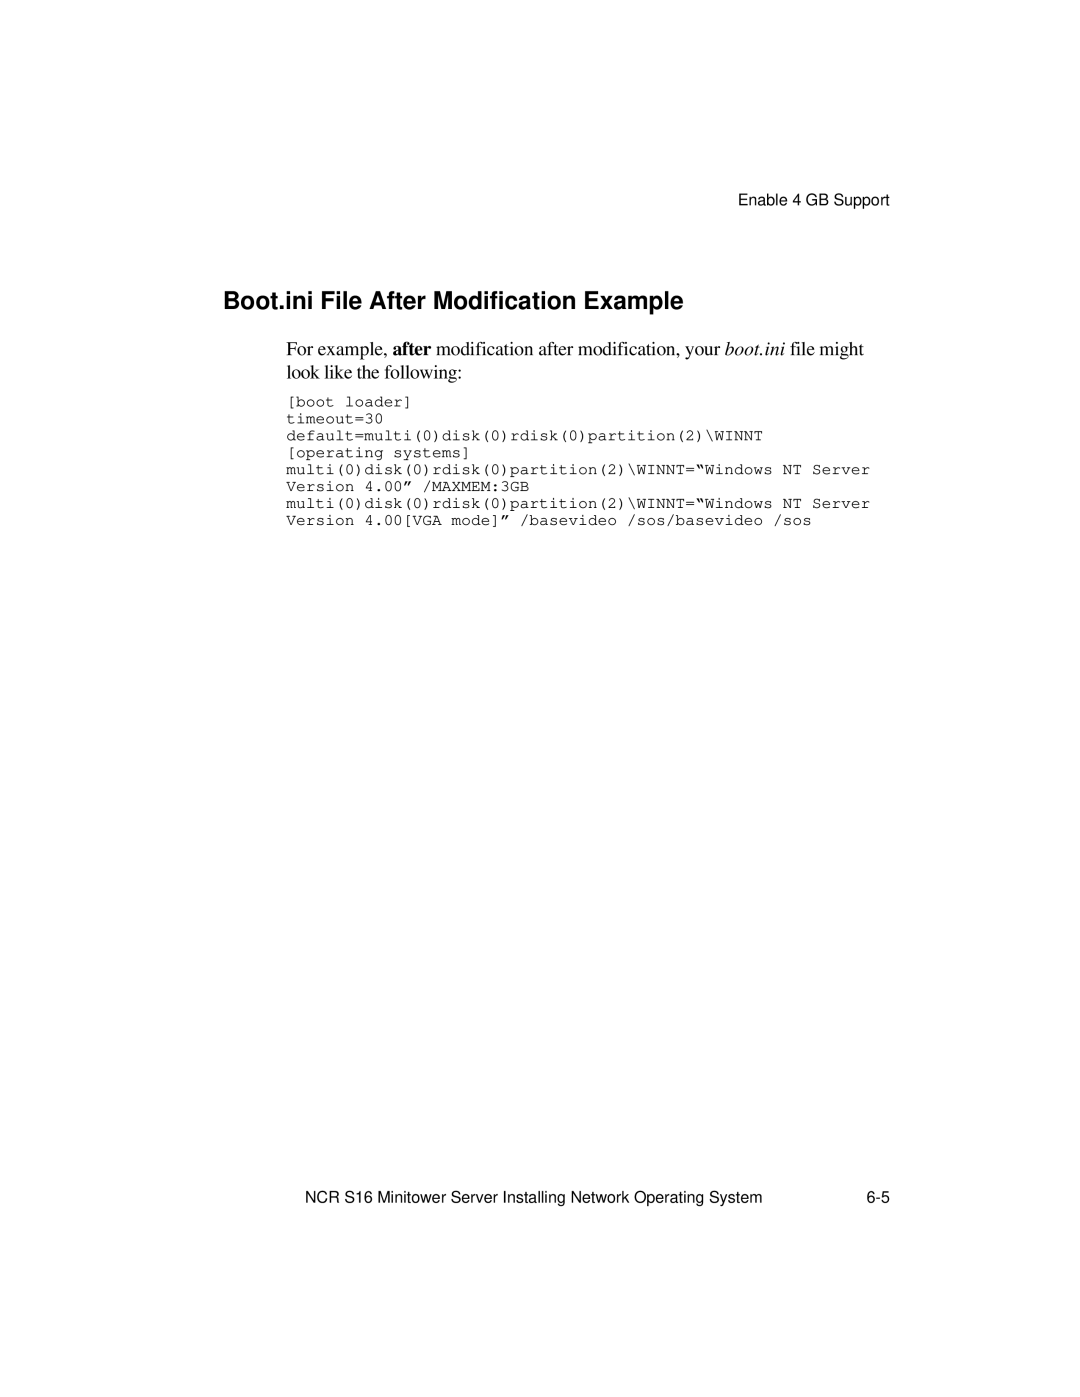 NCR S16 manual Boot.ini File After Modification Example 